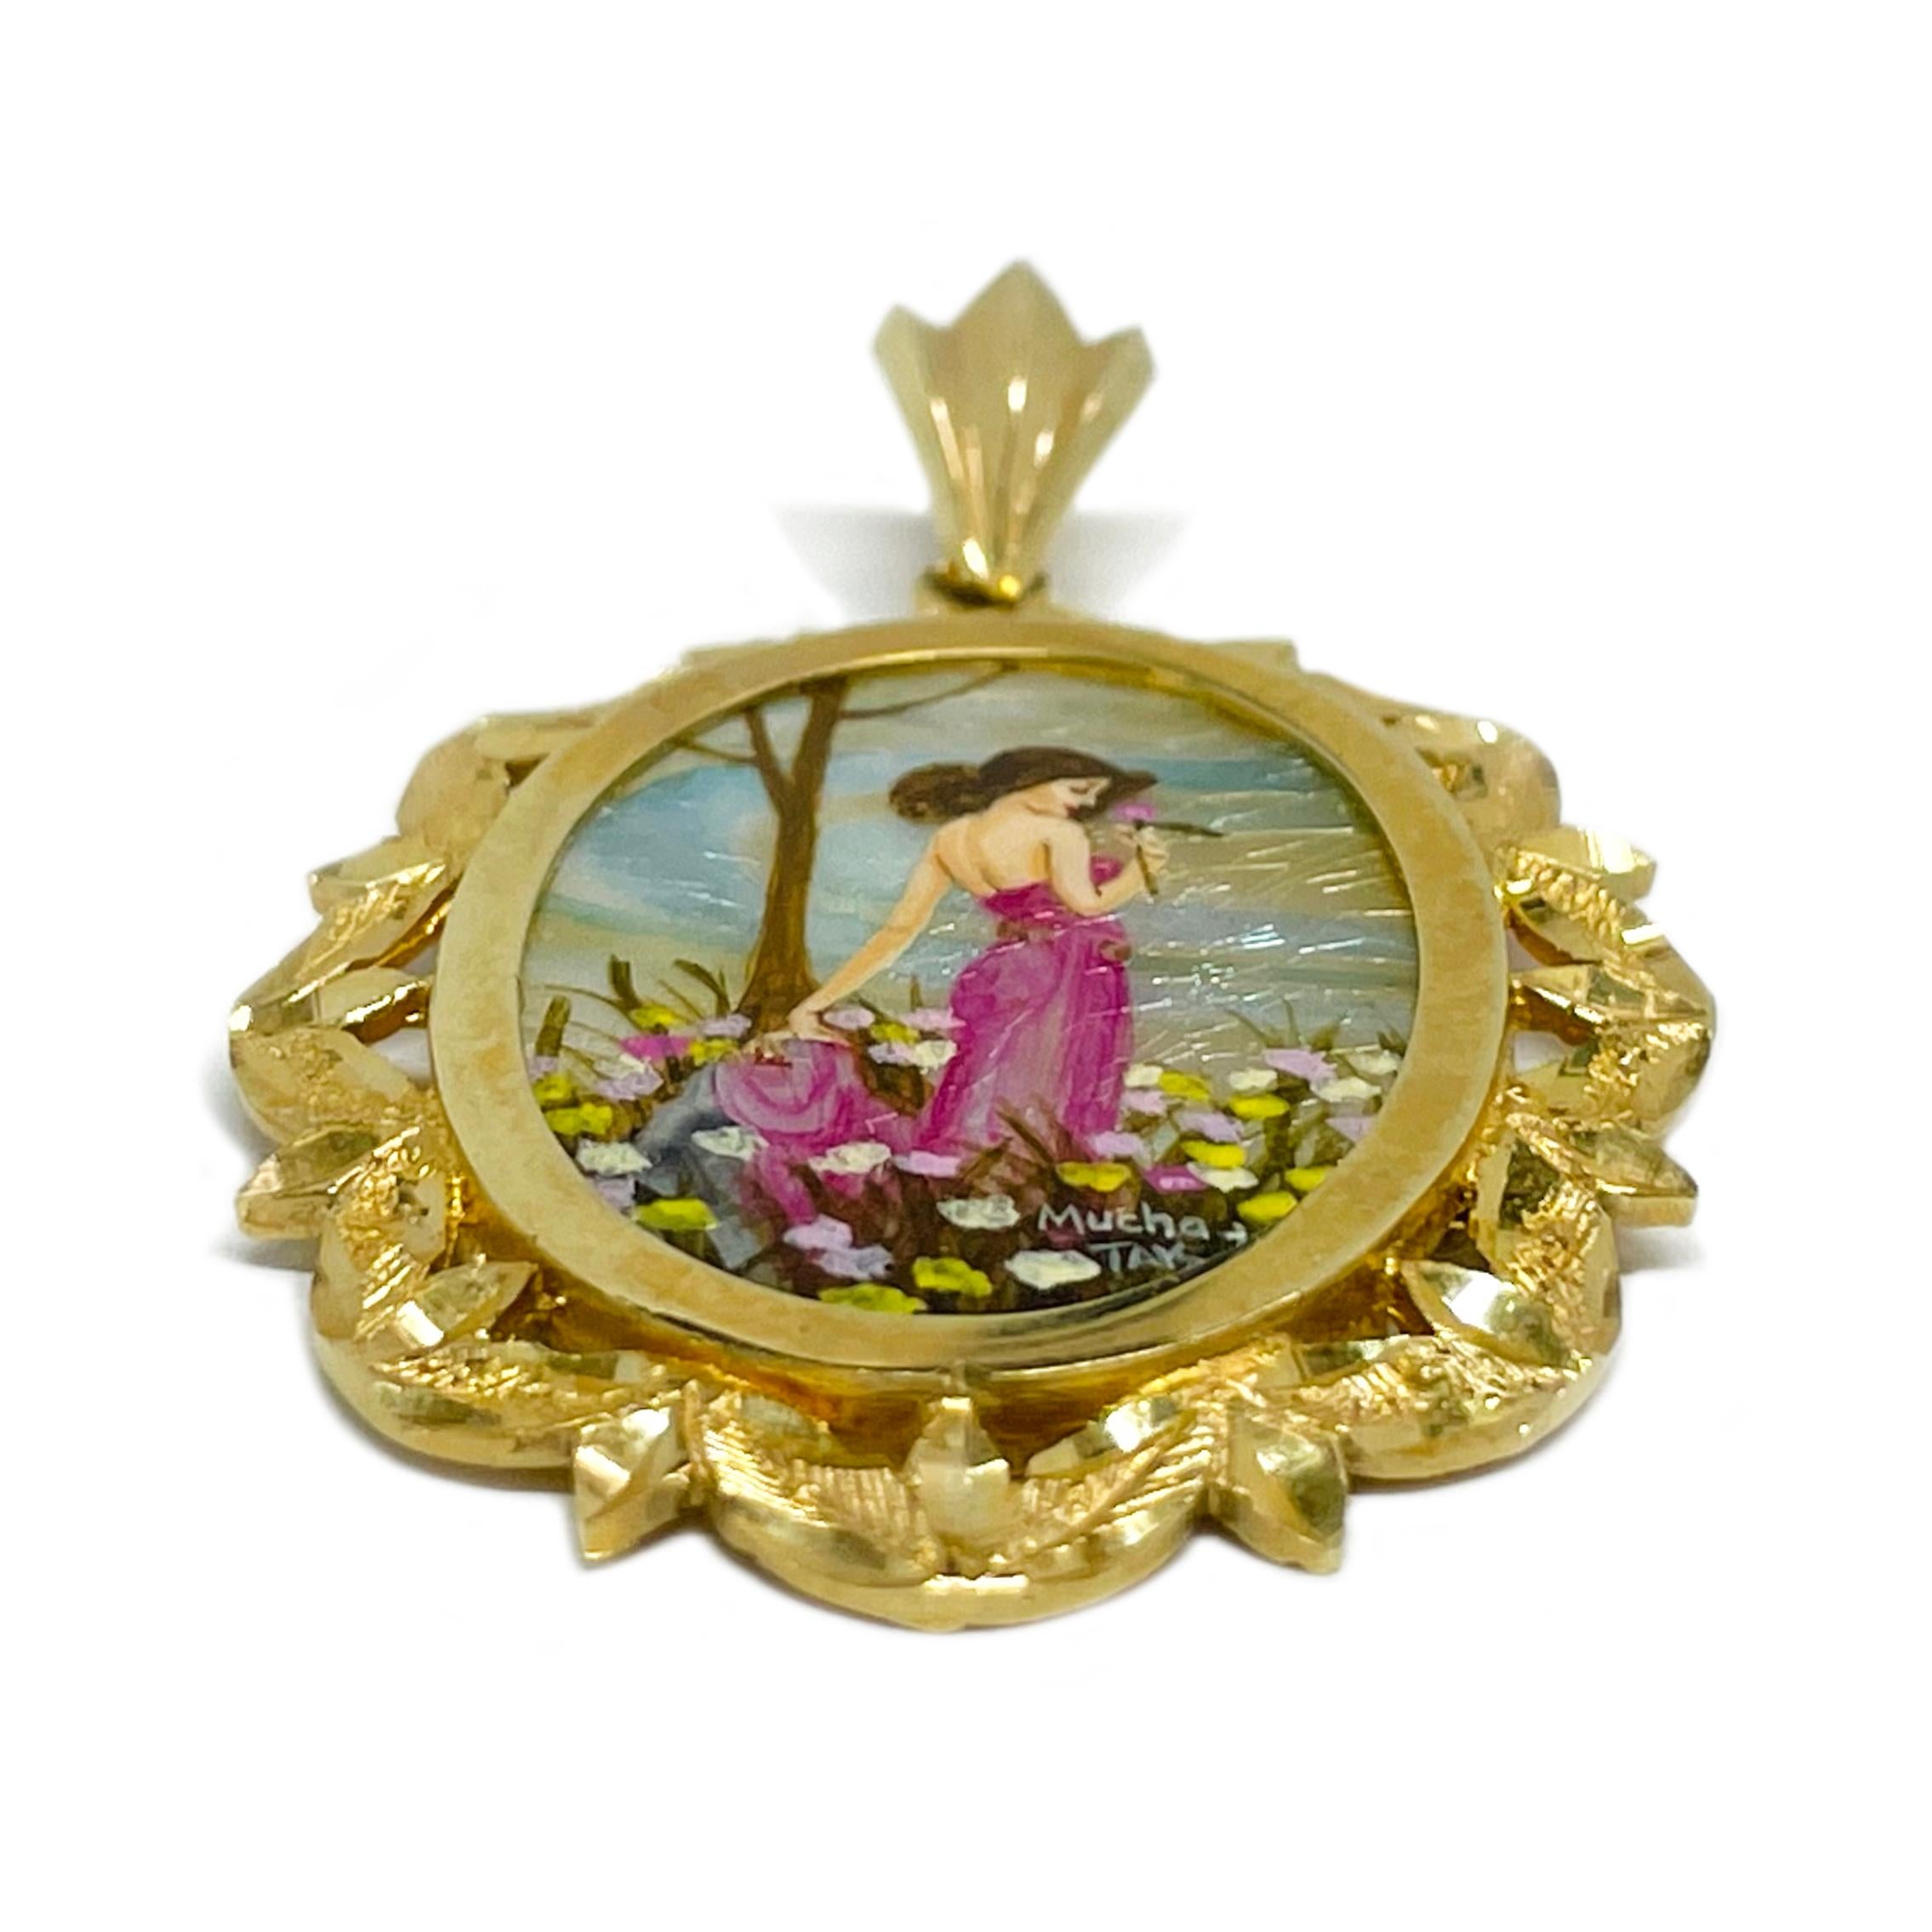 14 Karat Yellow Gold 'Carnation' Hand Painted Mother of Pearl Pendant. Absolutely lovely recreated Alphonse Mucha's 'Carnation' painting. The miniature painting is set in a 14 karat gold oval frame with diamond-cut details. The painting is signed by